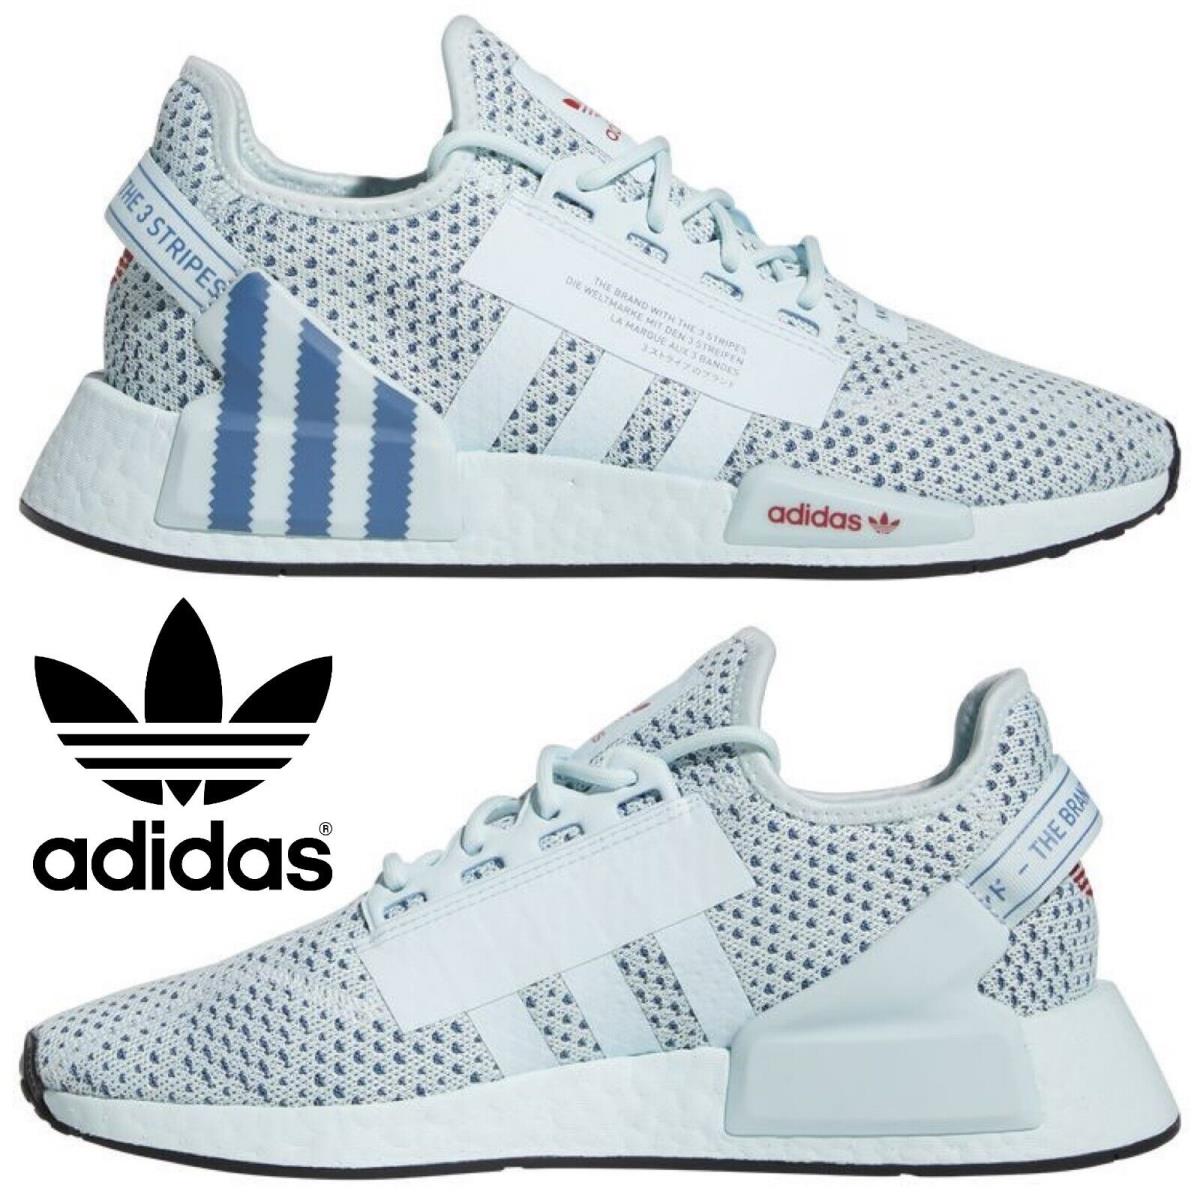 Adidas Originals Nmd R1 V2 Men`s Sneakers Running Shoes Gym Casual Sport Blue